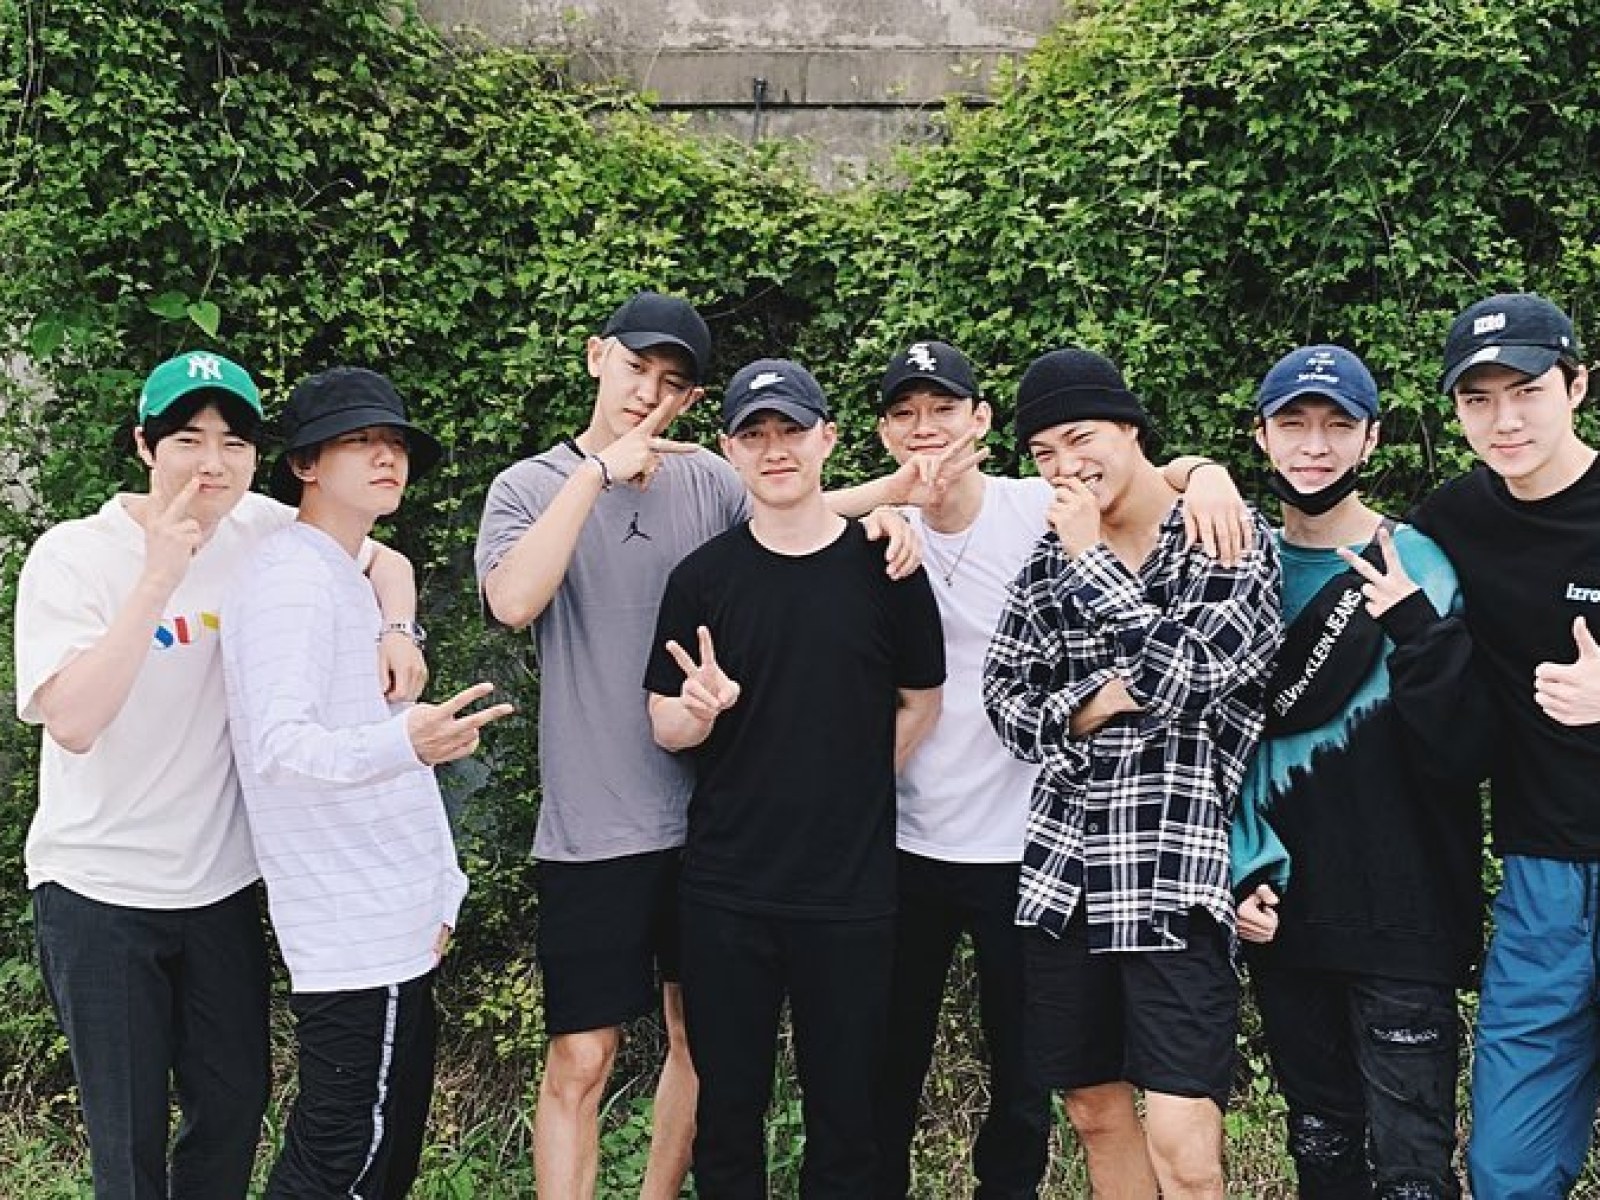 Fans Delighted After K Pop Star Zhang Yixing Joins Exo To See Off Doh Kyung Soo Before Military Enlistment